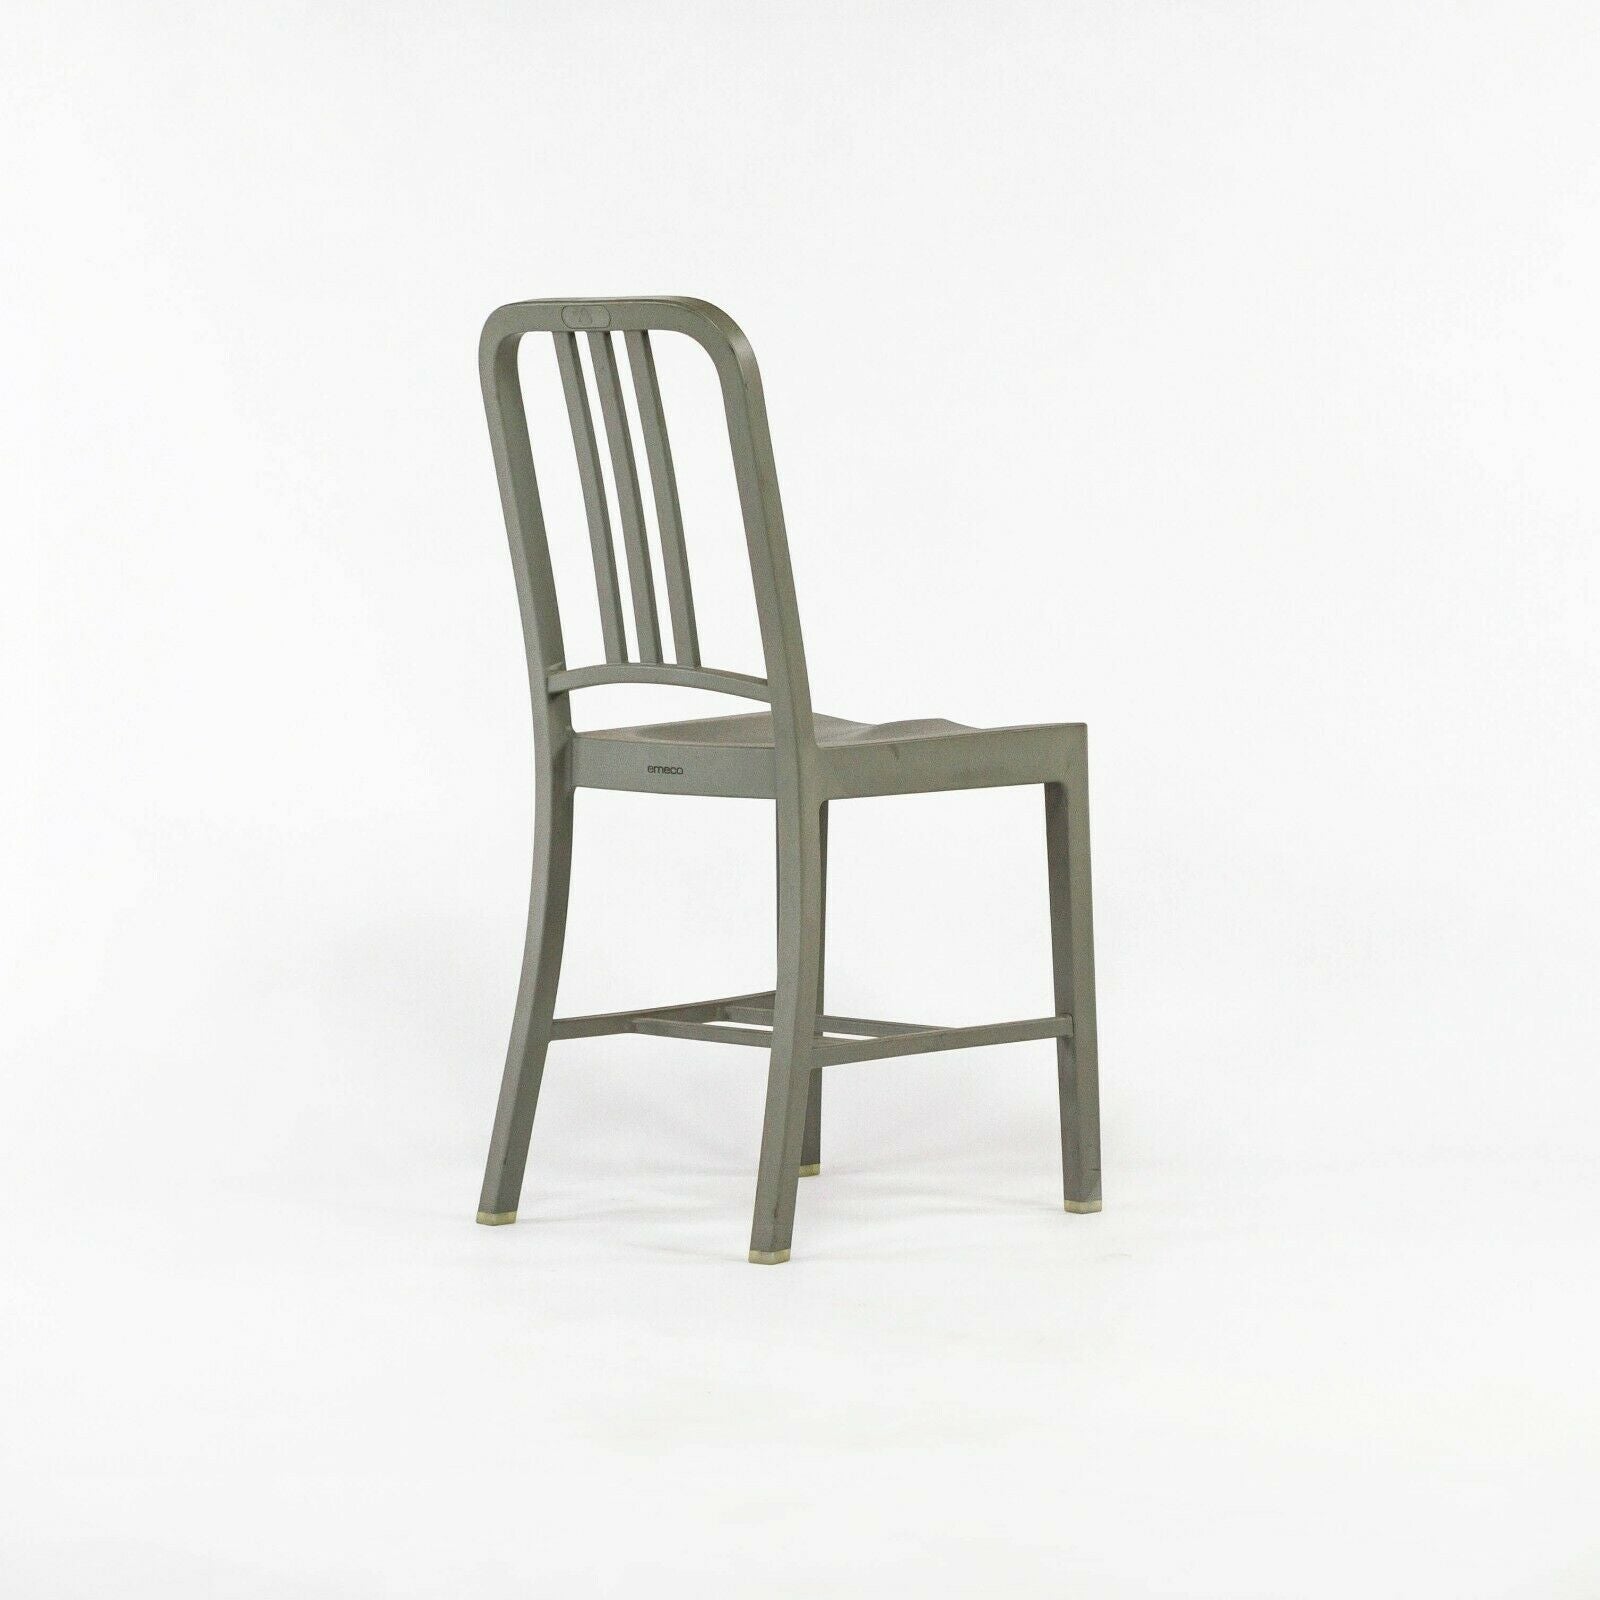 SOLD Emeco Coca-Cola 111 Navy Chair in Flint Gray Made From Recycled Plastic Bottles